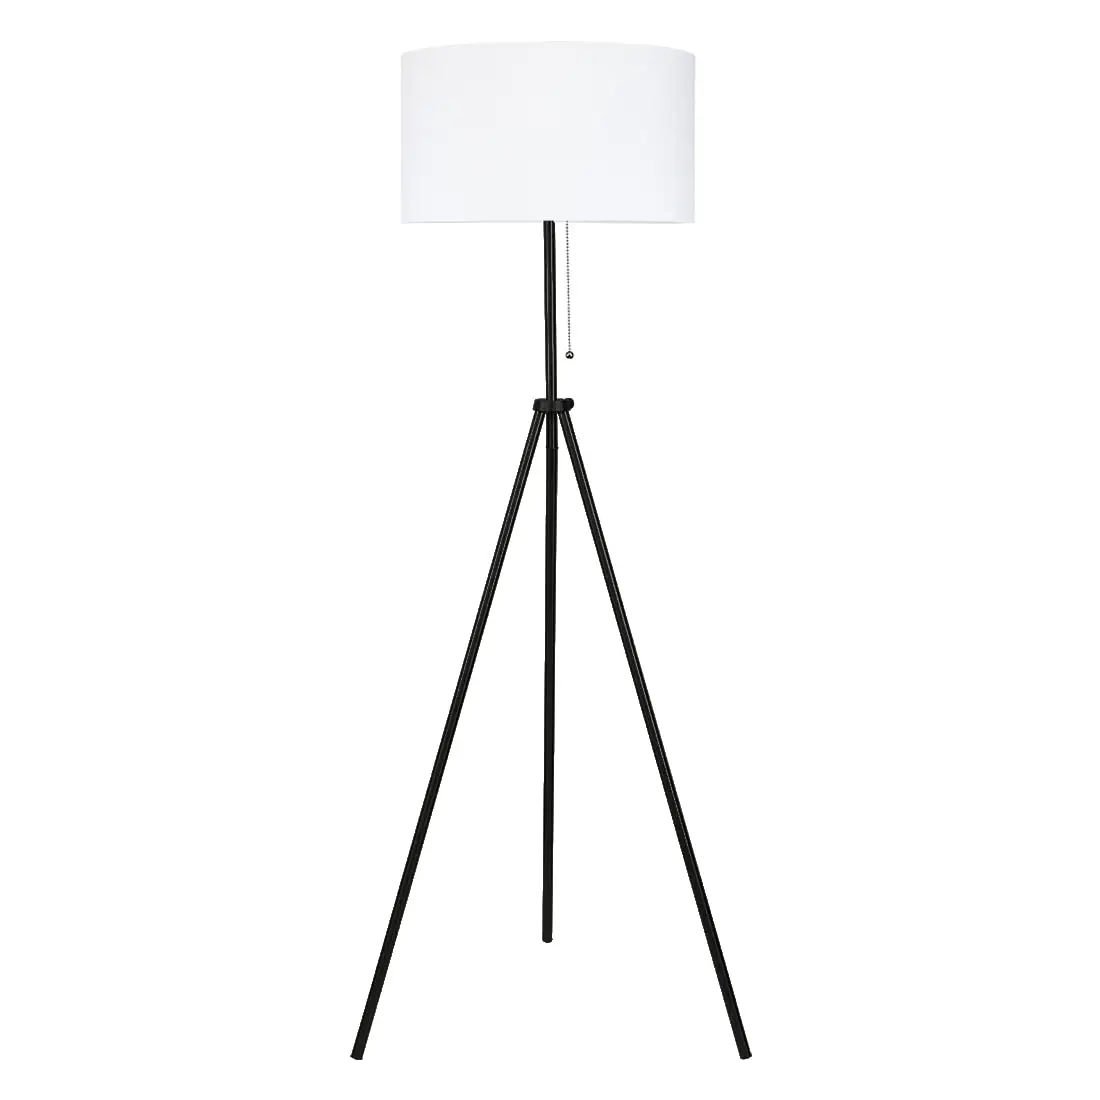 Bright Tripod Floor Lamp, Adjustable in Height, 100% Metal Body with Linen Drum Shade, E26 Socket, Bedside , Standing Light